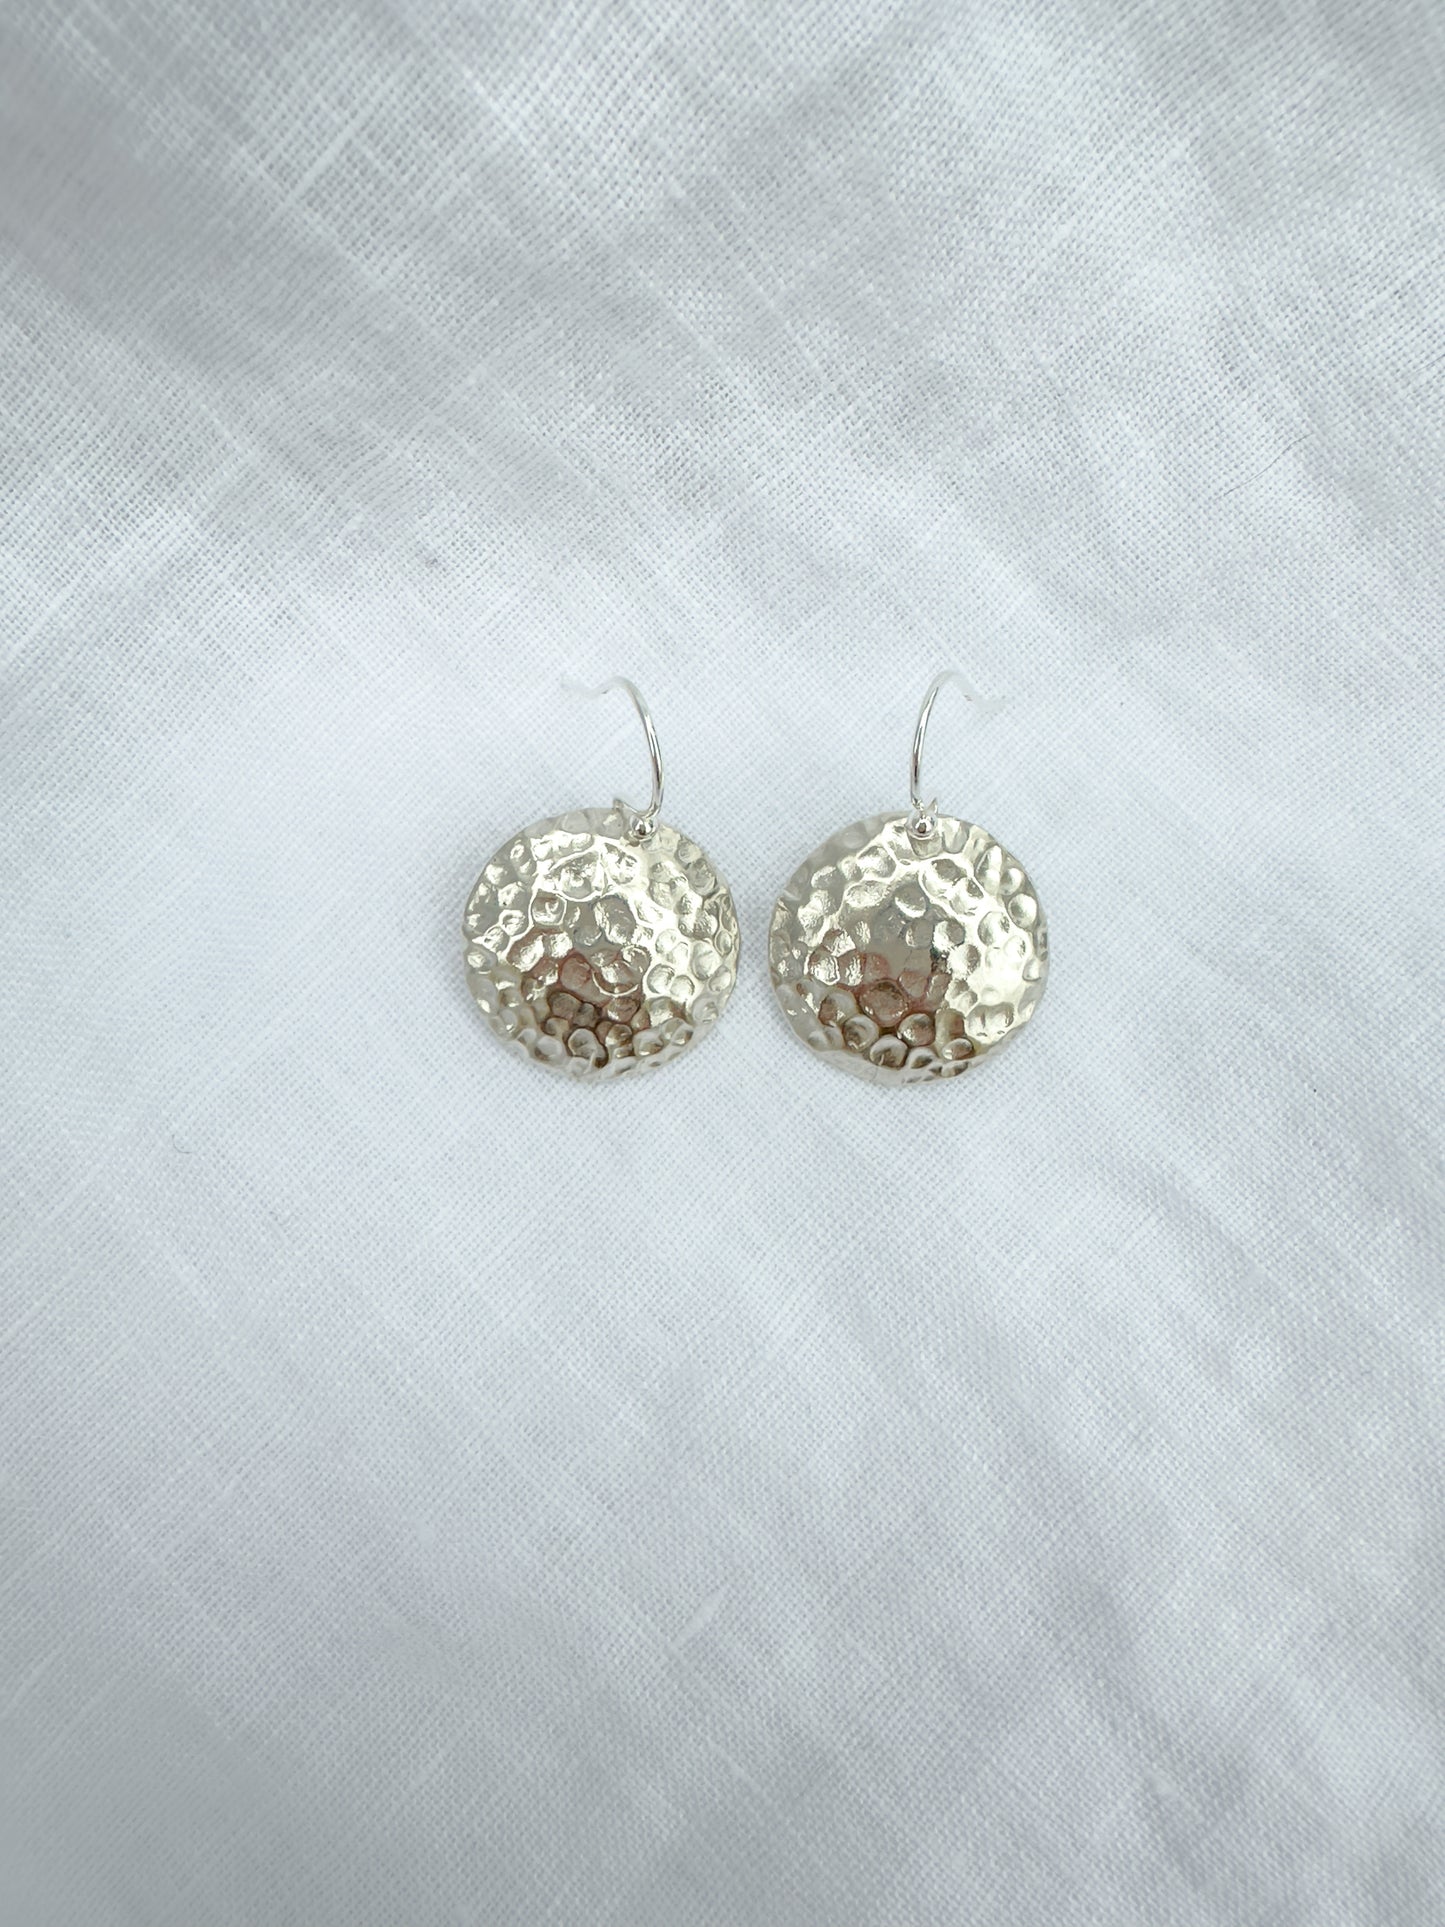 RIPPLING WATER | dome earrings, lightweight one of a kind